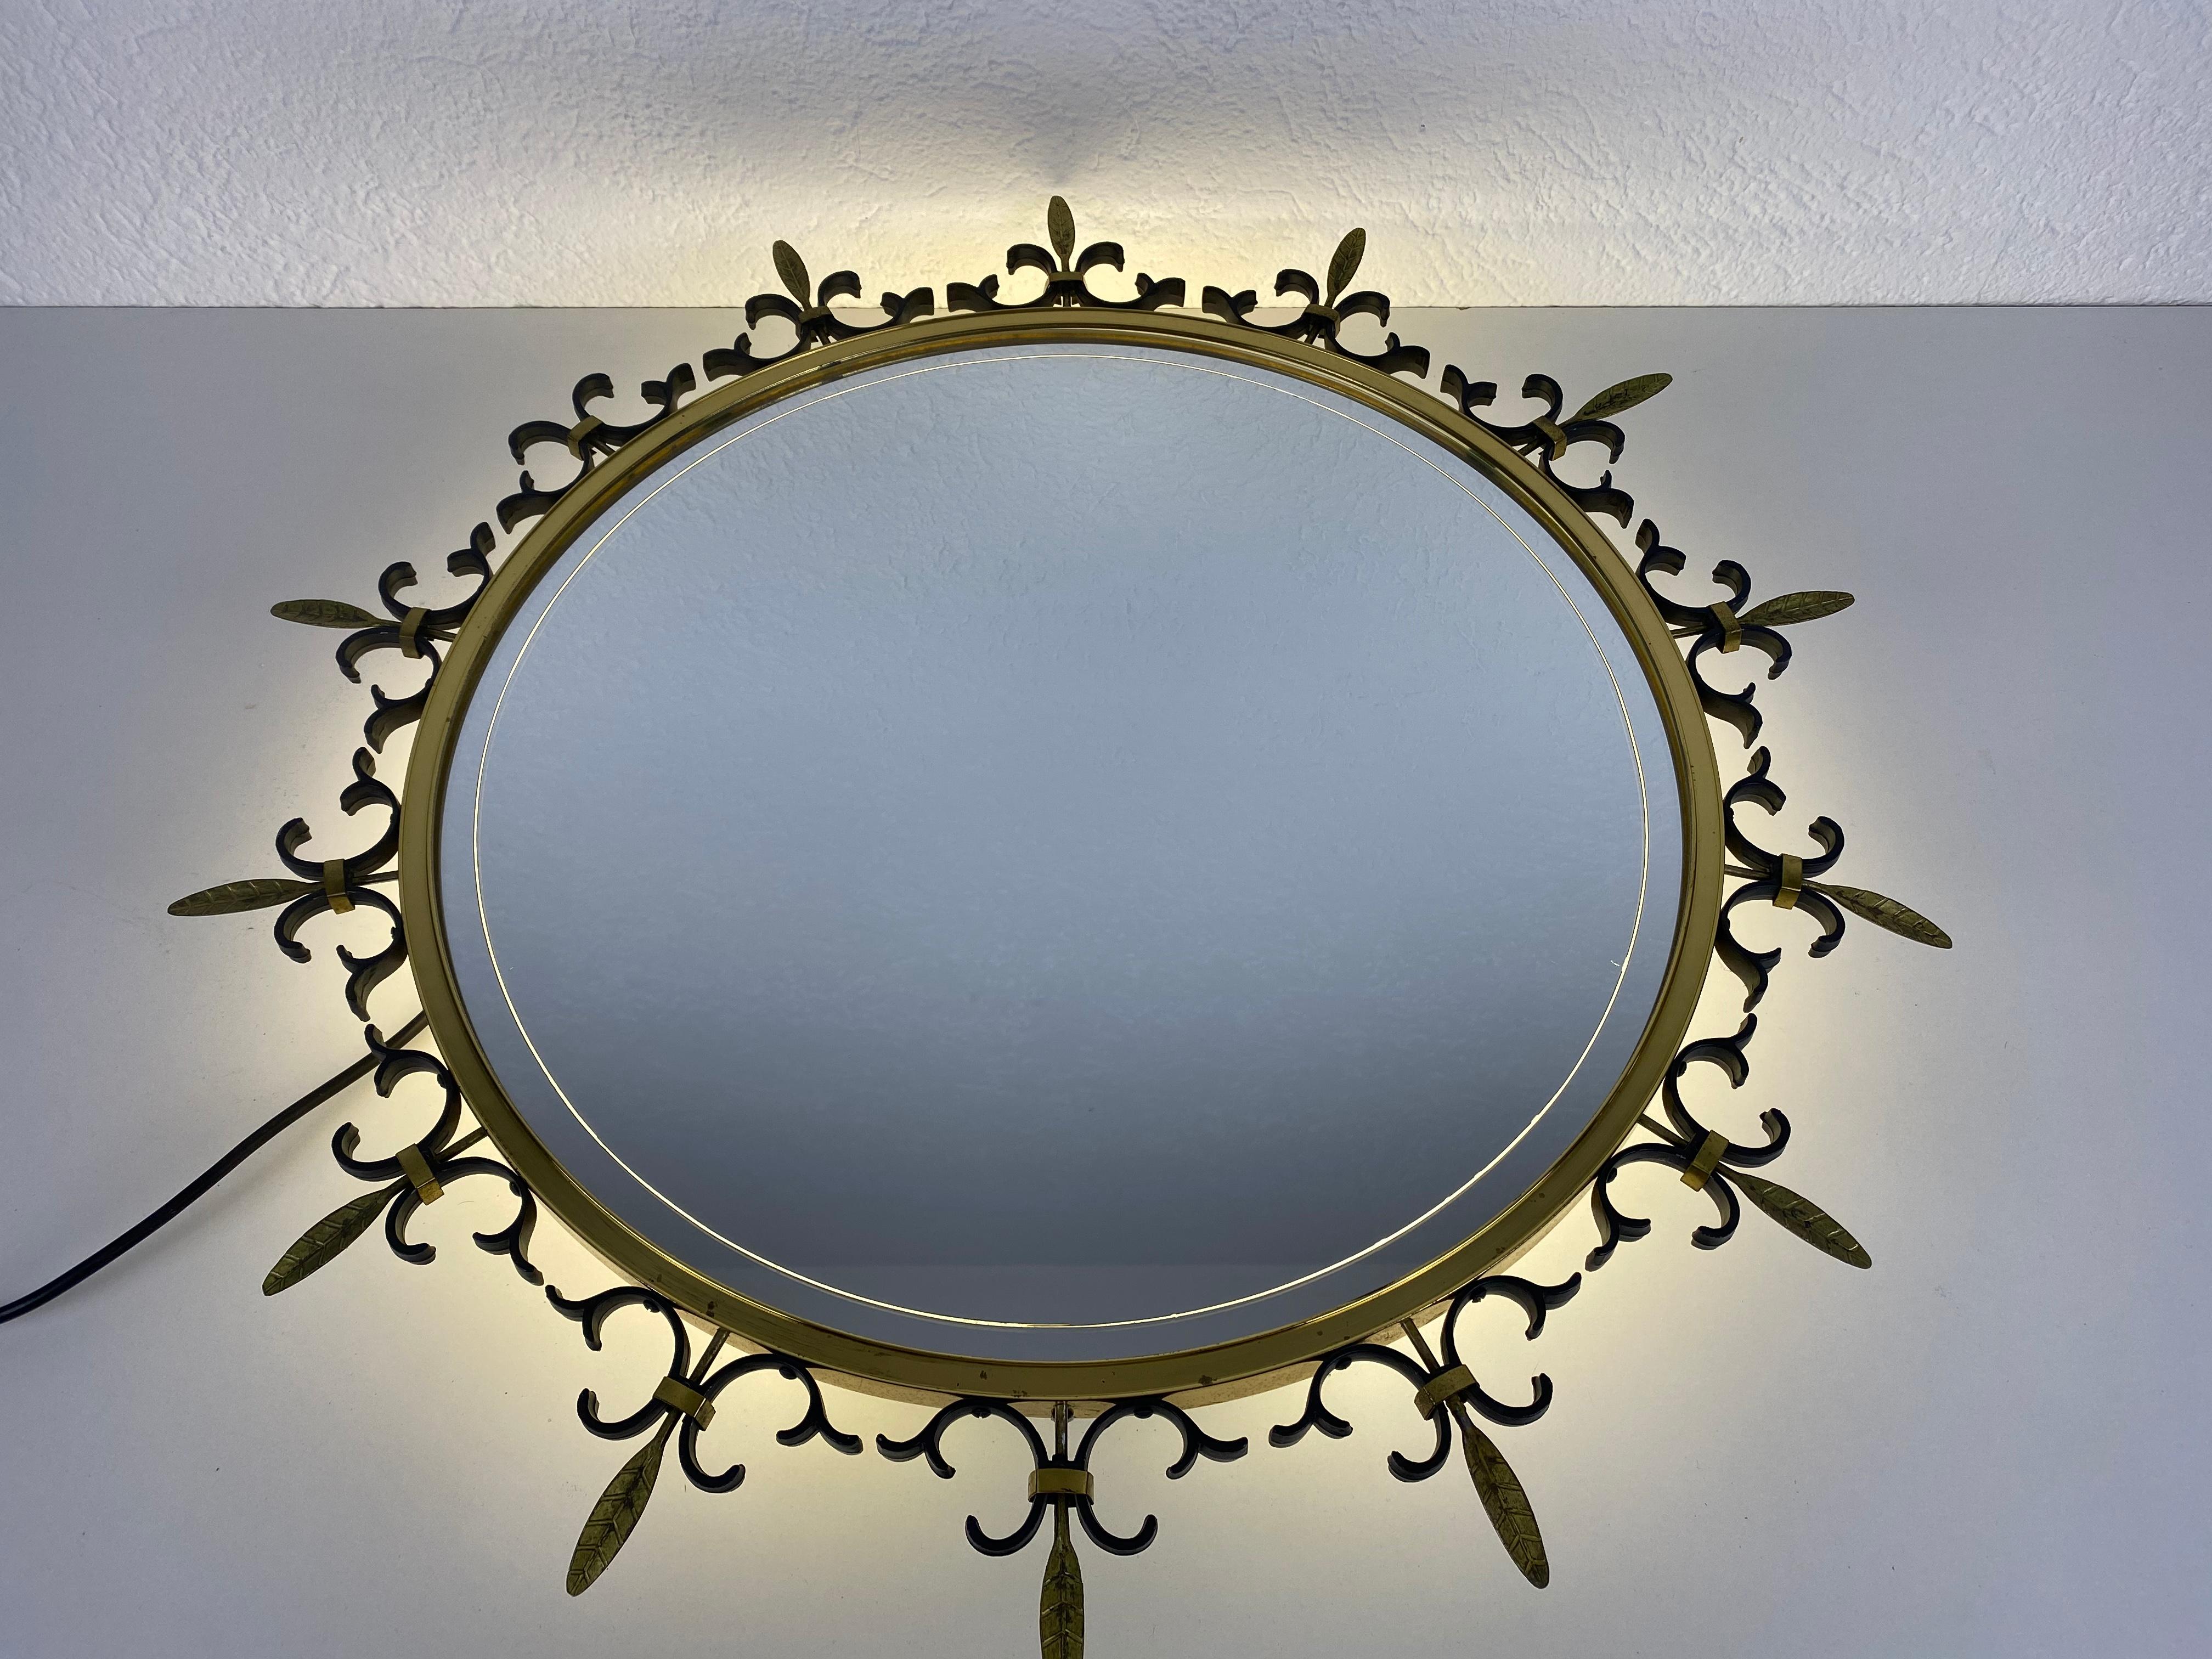 An illuminated round wall mirror from the 1960s made in Italy. The mirror has a circular brass design. The mirror is in a good vintage condition.

Free worldwide standard shipping.